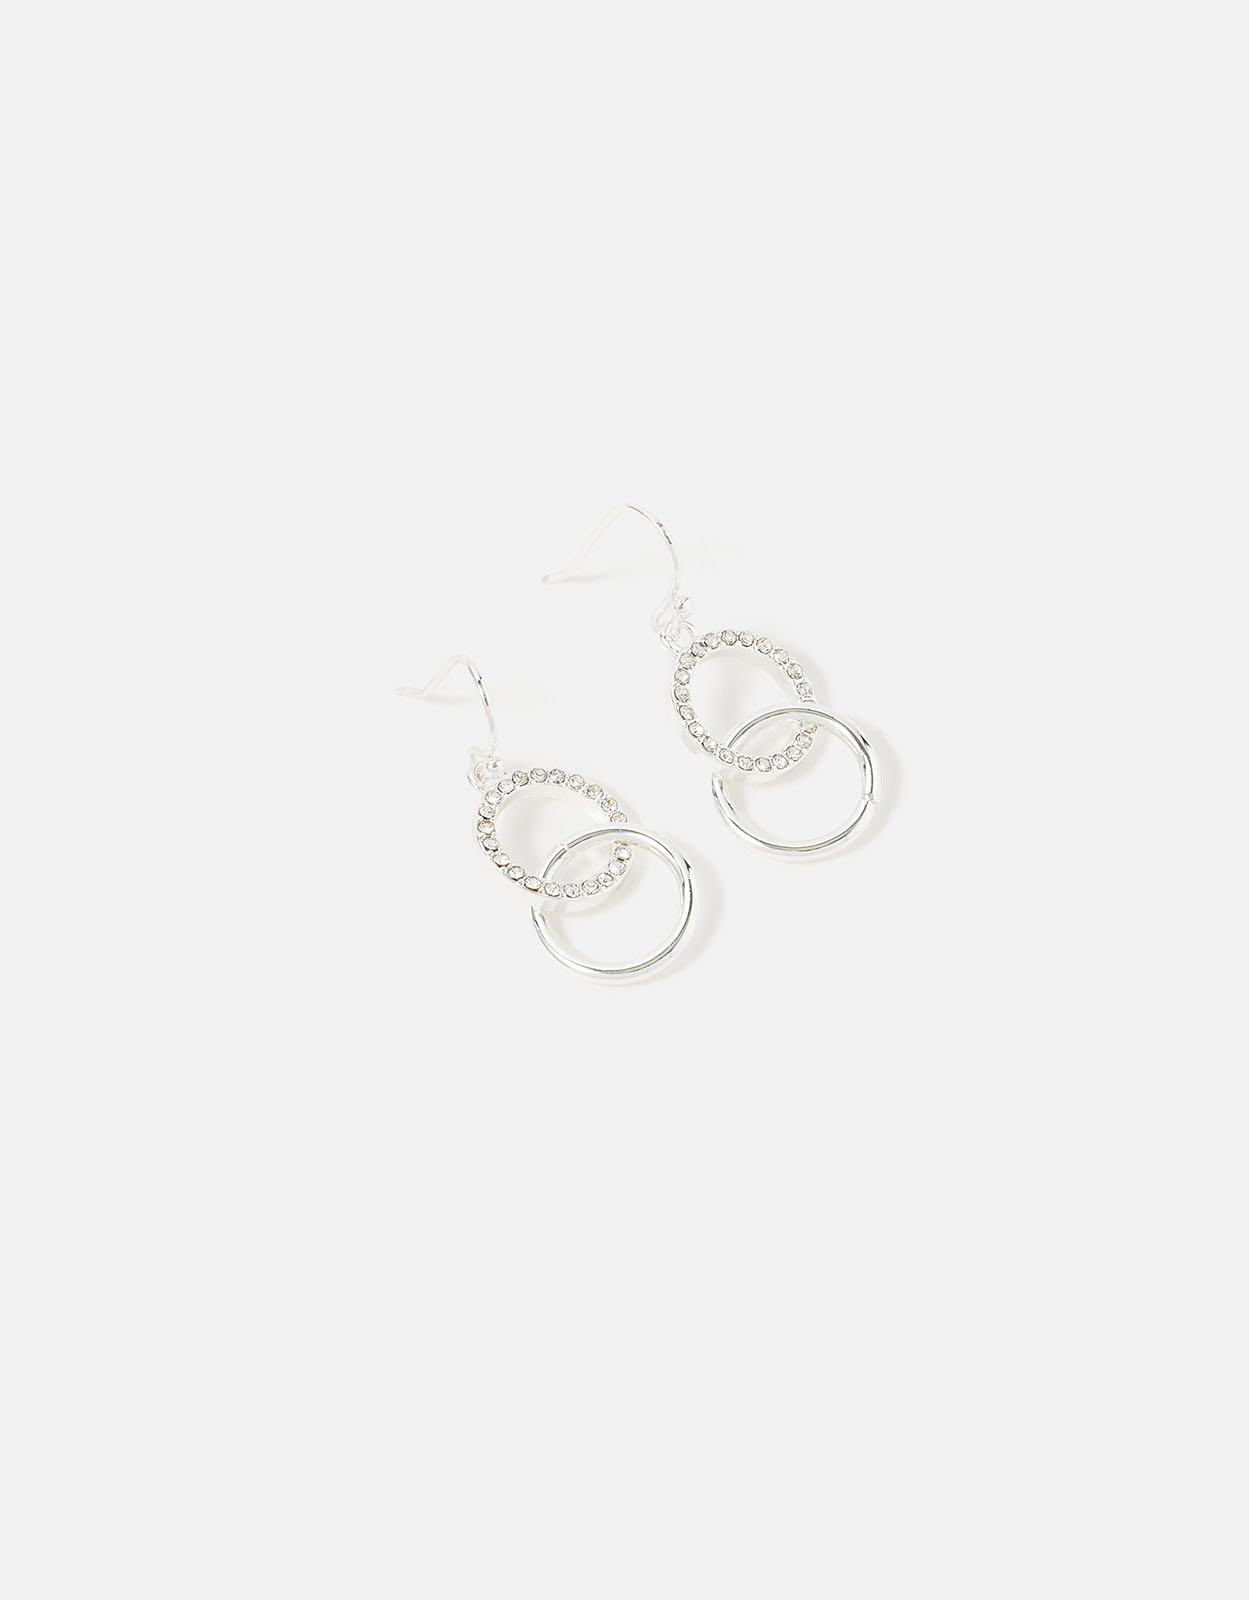 Accessorize Women's Linked Circle Short Drop Earrings Silver, Size: One Size